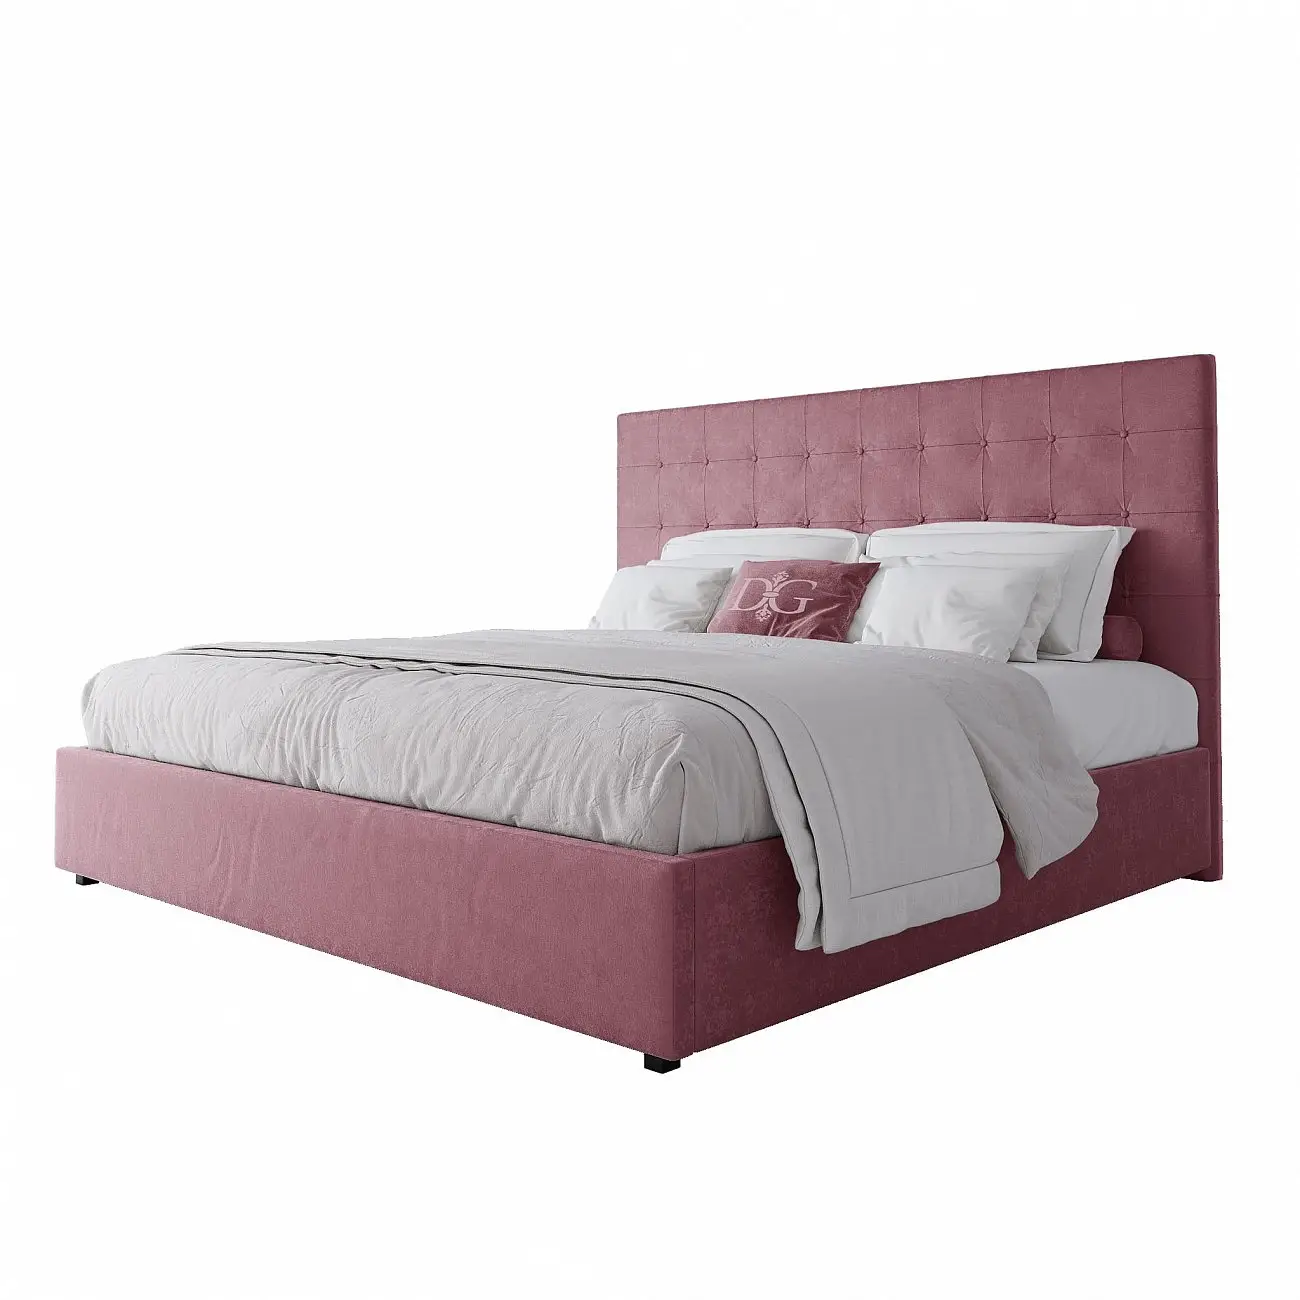 Euro bed with upholstered headboard 200x200 cm dusty Rose Royal Black